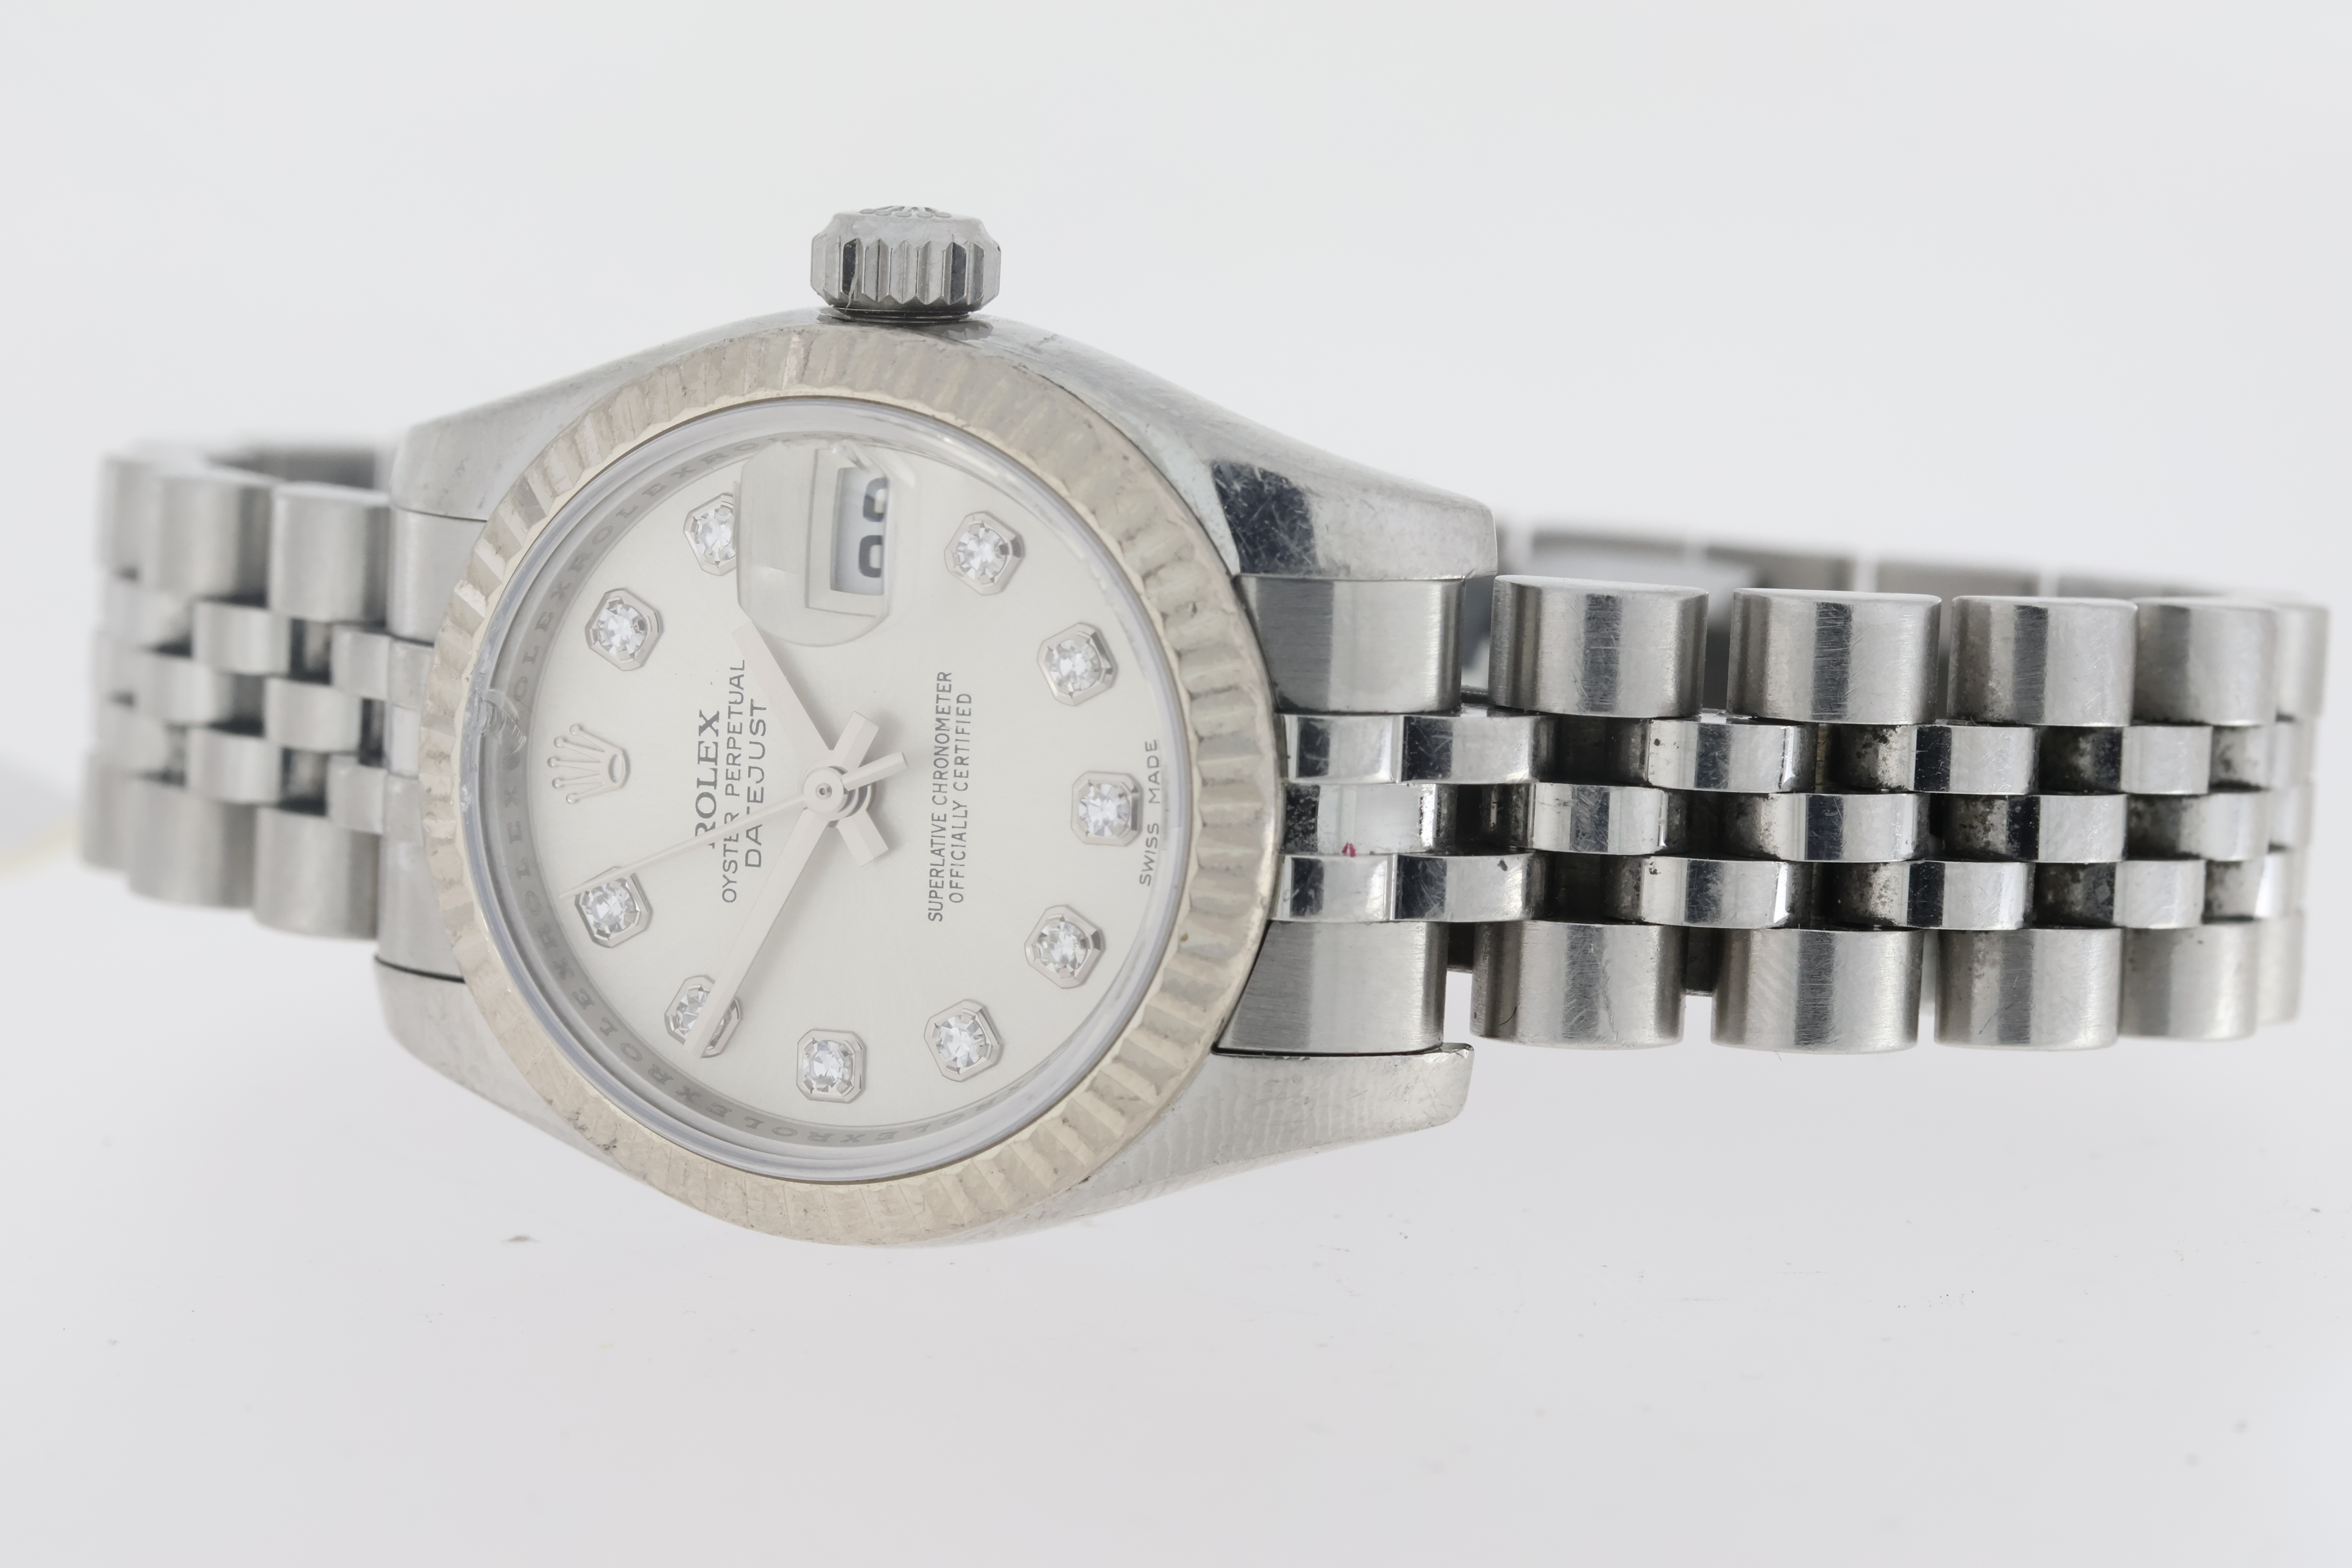 Ladies Rolex Datejust 26 Reference 179174 Box and Papers 2008 - Image 2 of 4